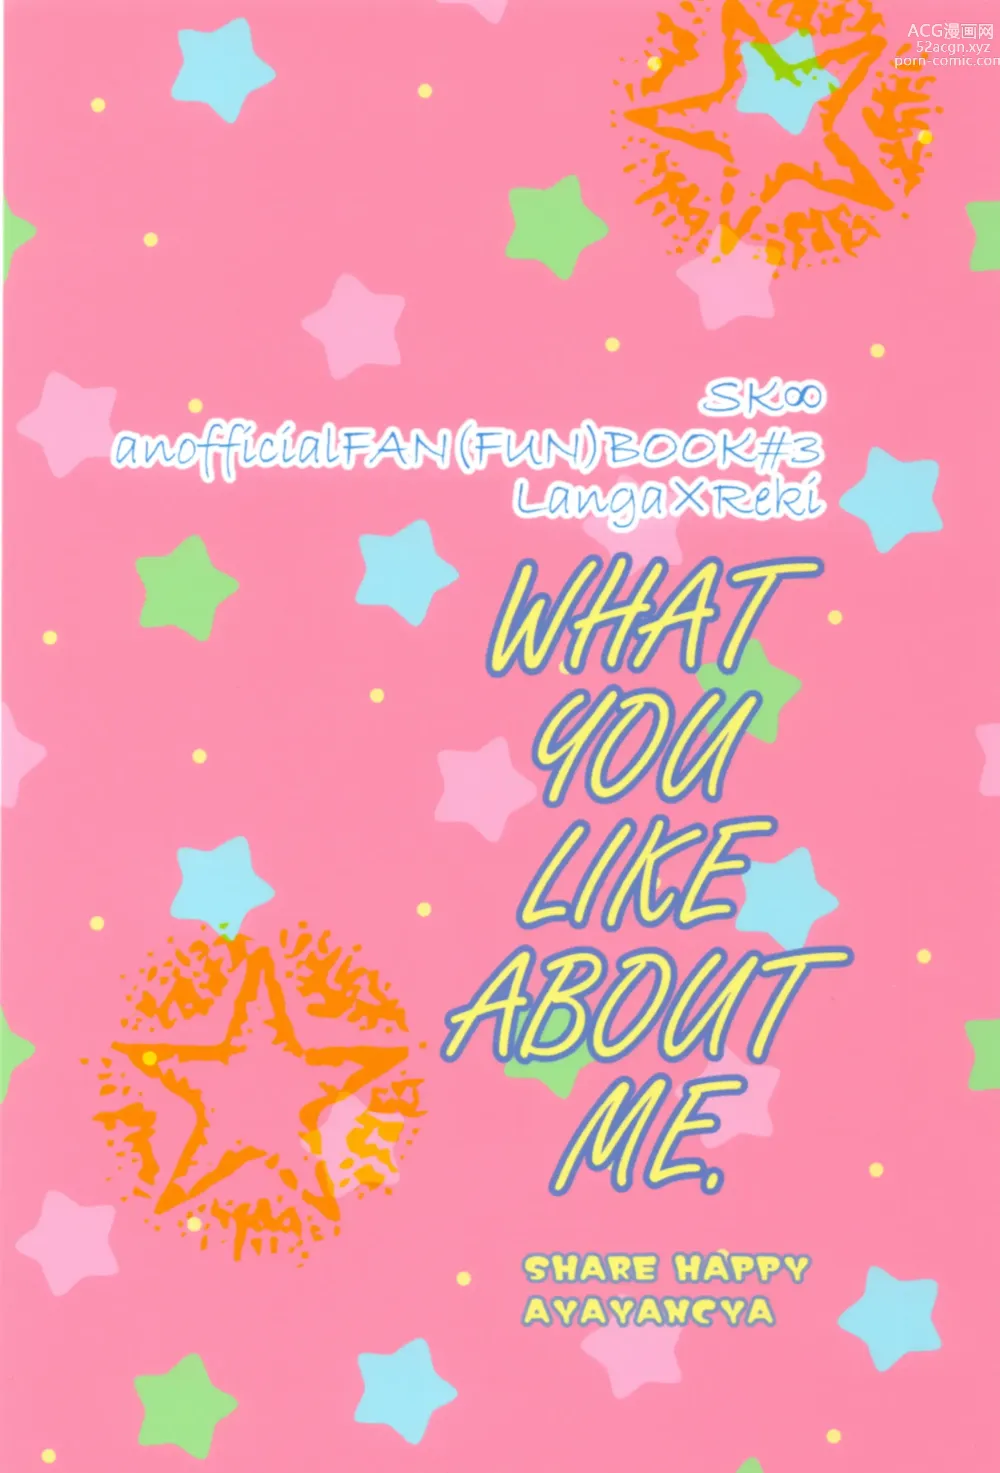 Page 42 of doujinshi What you like about me.